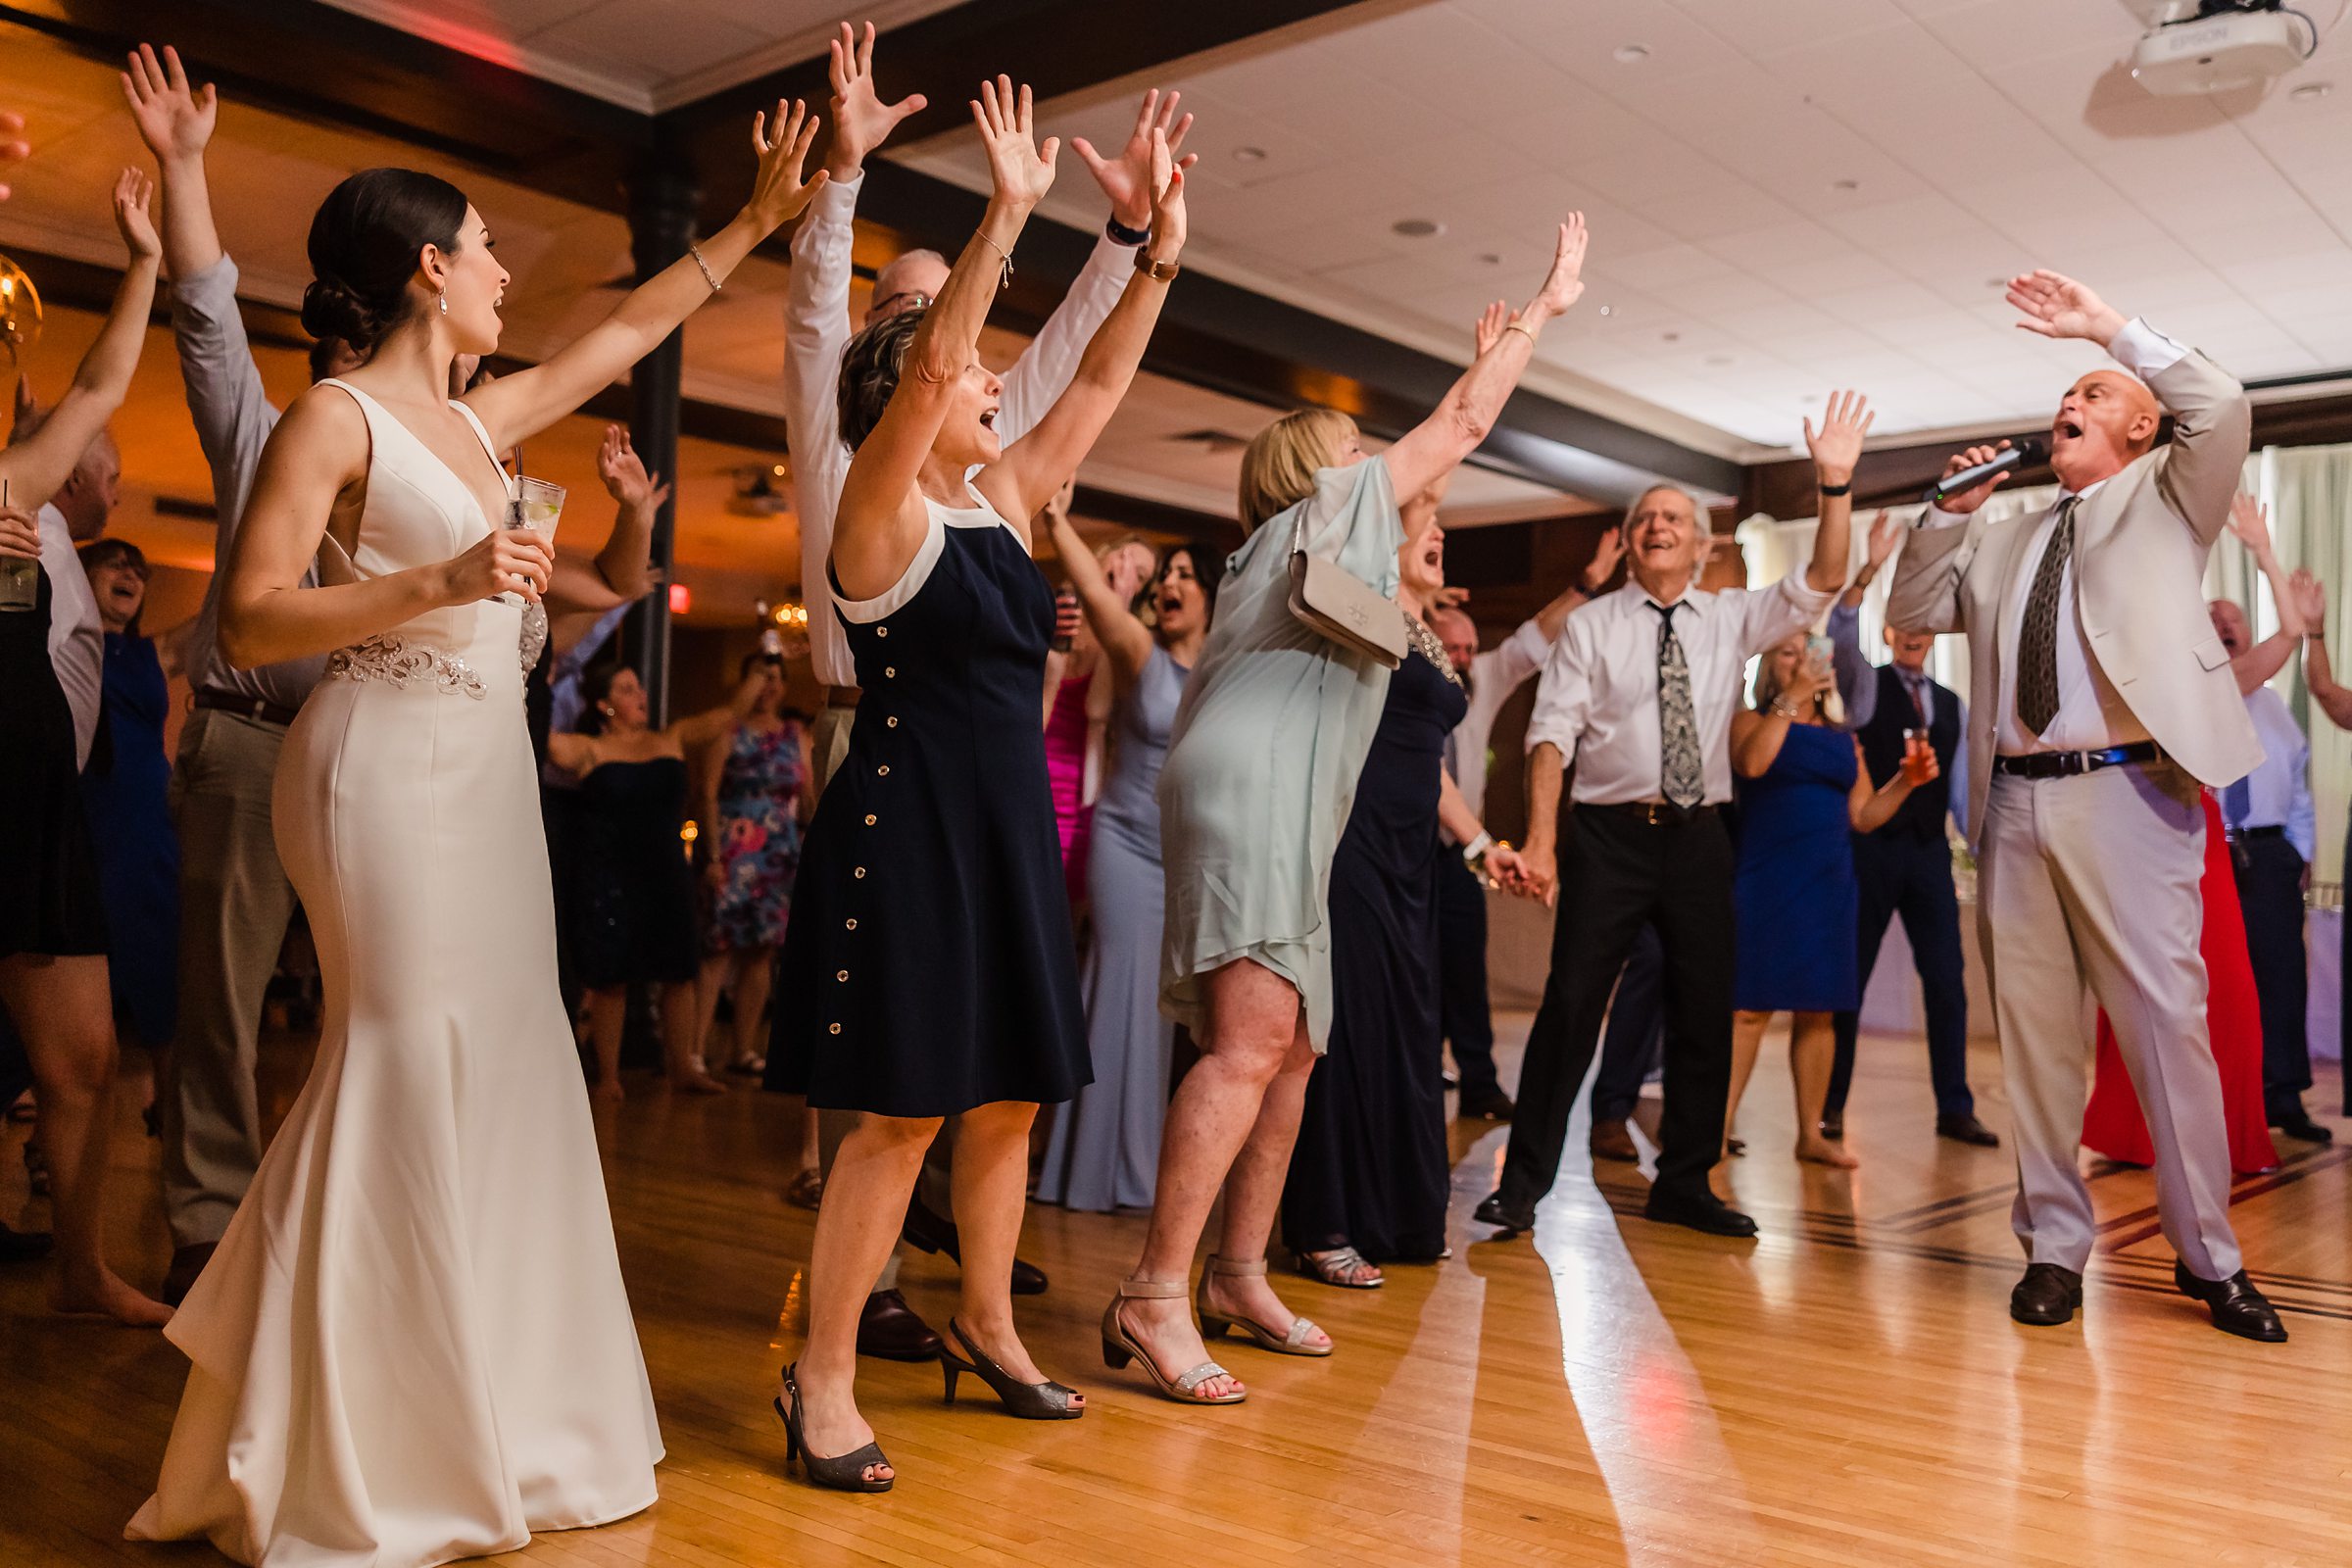 Everyone sings together during a wedding at the Chevy Chase Country Club in Wheeling, Illinois.